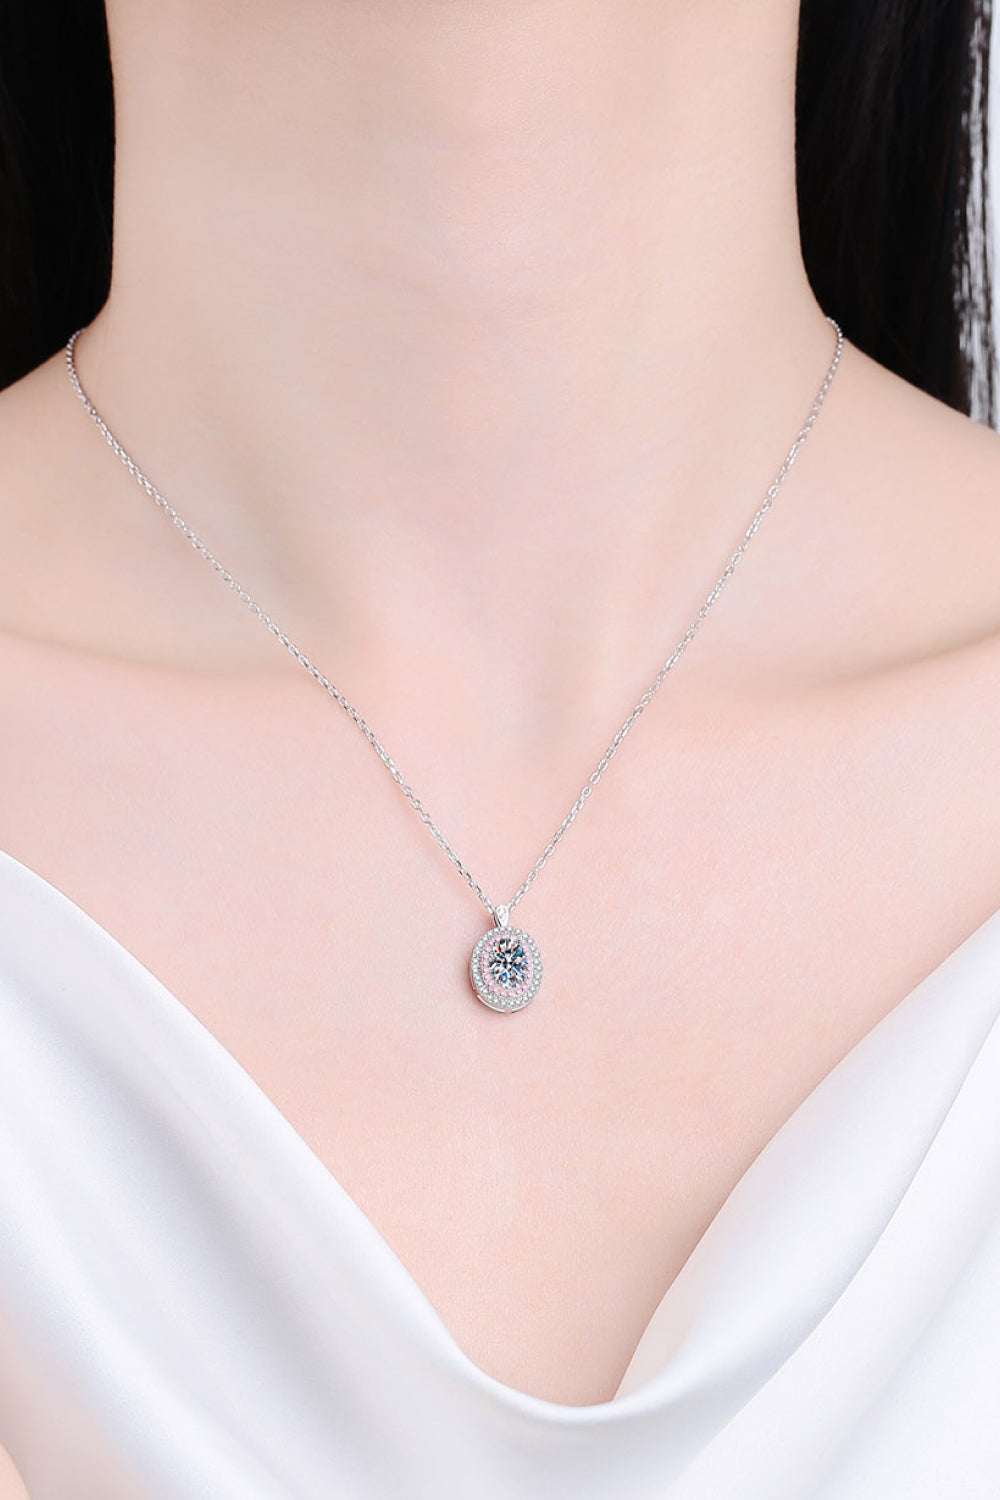 Need You Now Oval Sterling Silver Rhodium-Plated 1 Carat Moissanite Pendant Necklace